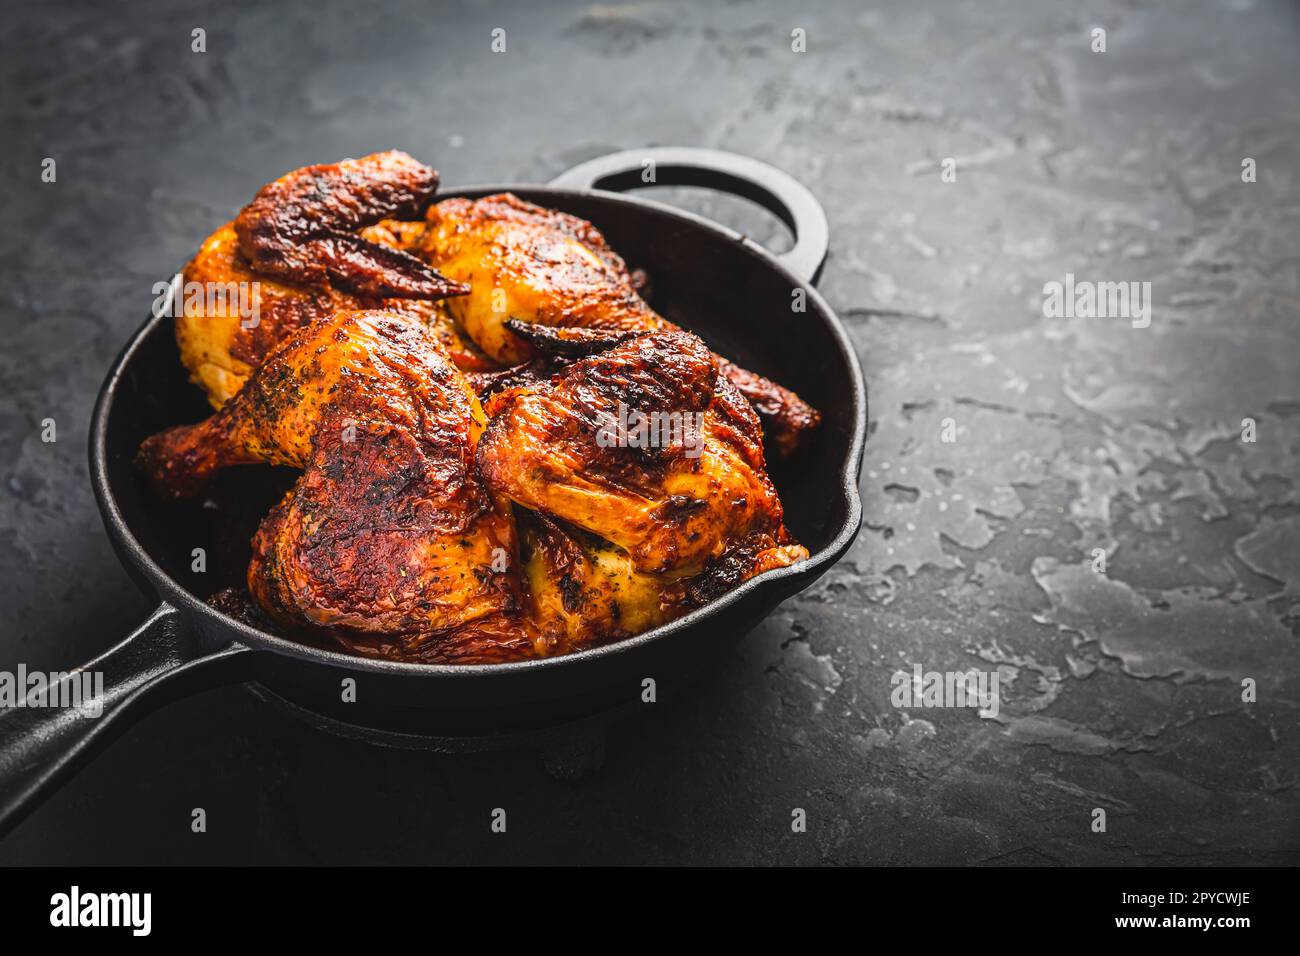 Roasted half chicken in pan on black background Stock Photo